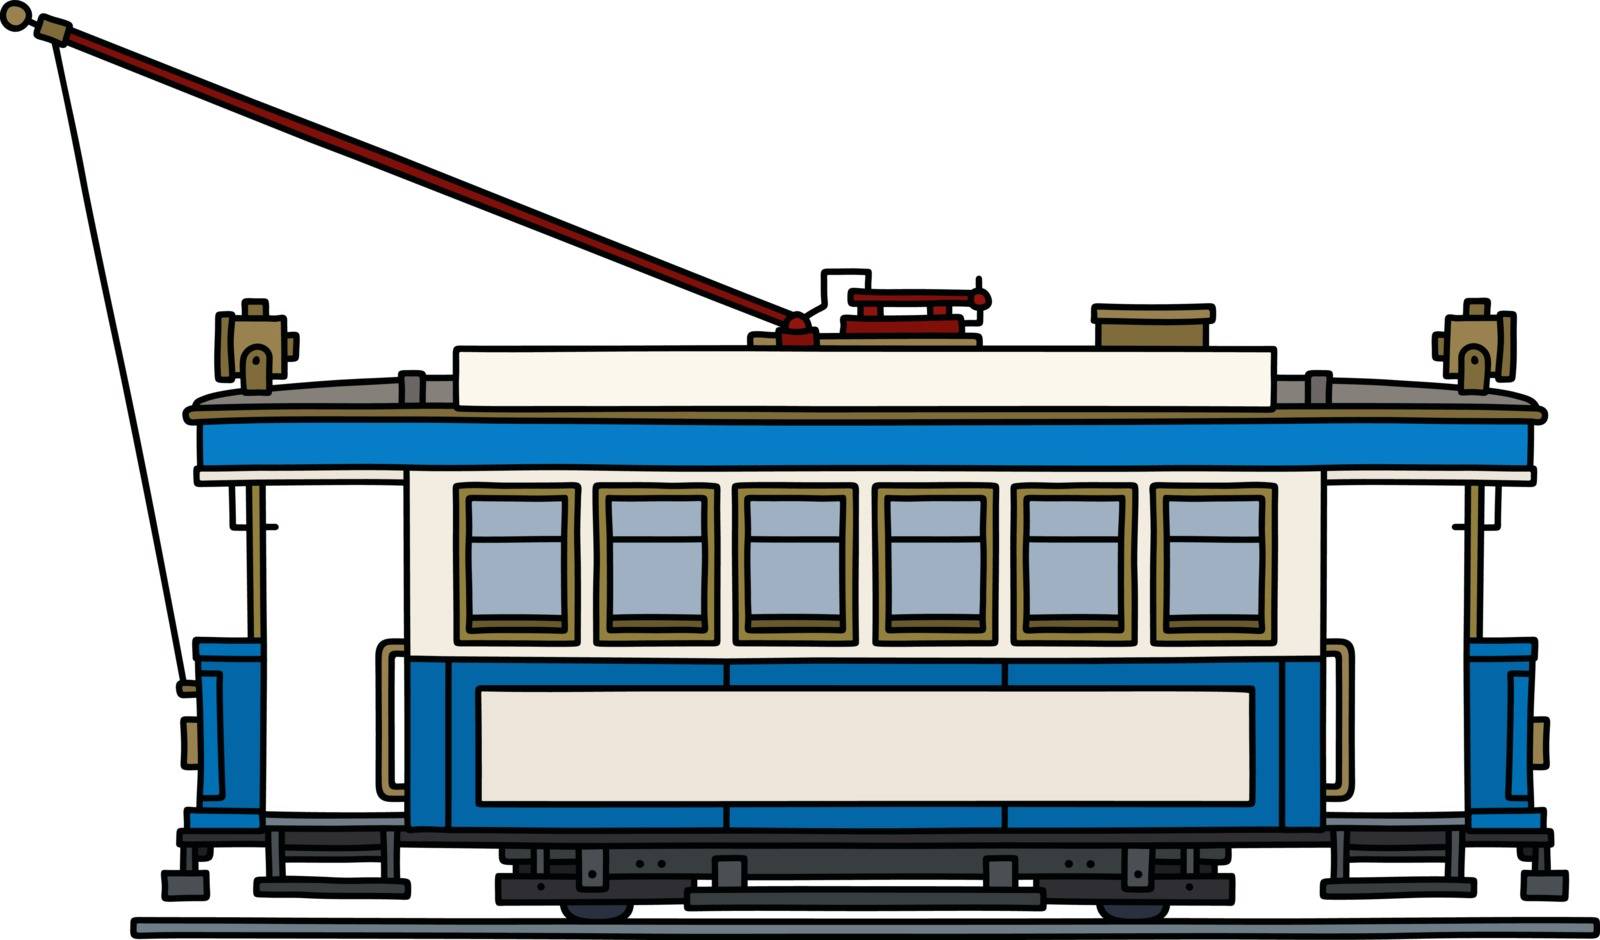 The vectorized hand drawing of a classic blue and white tramway